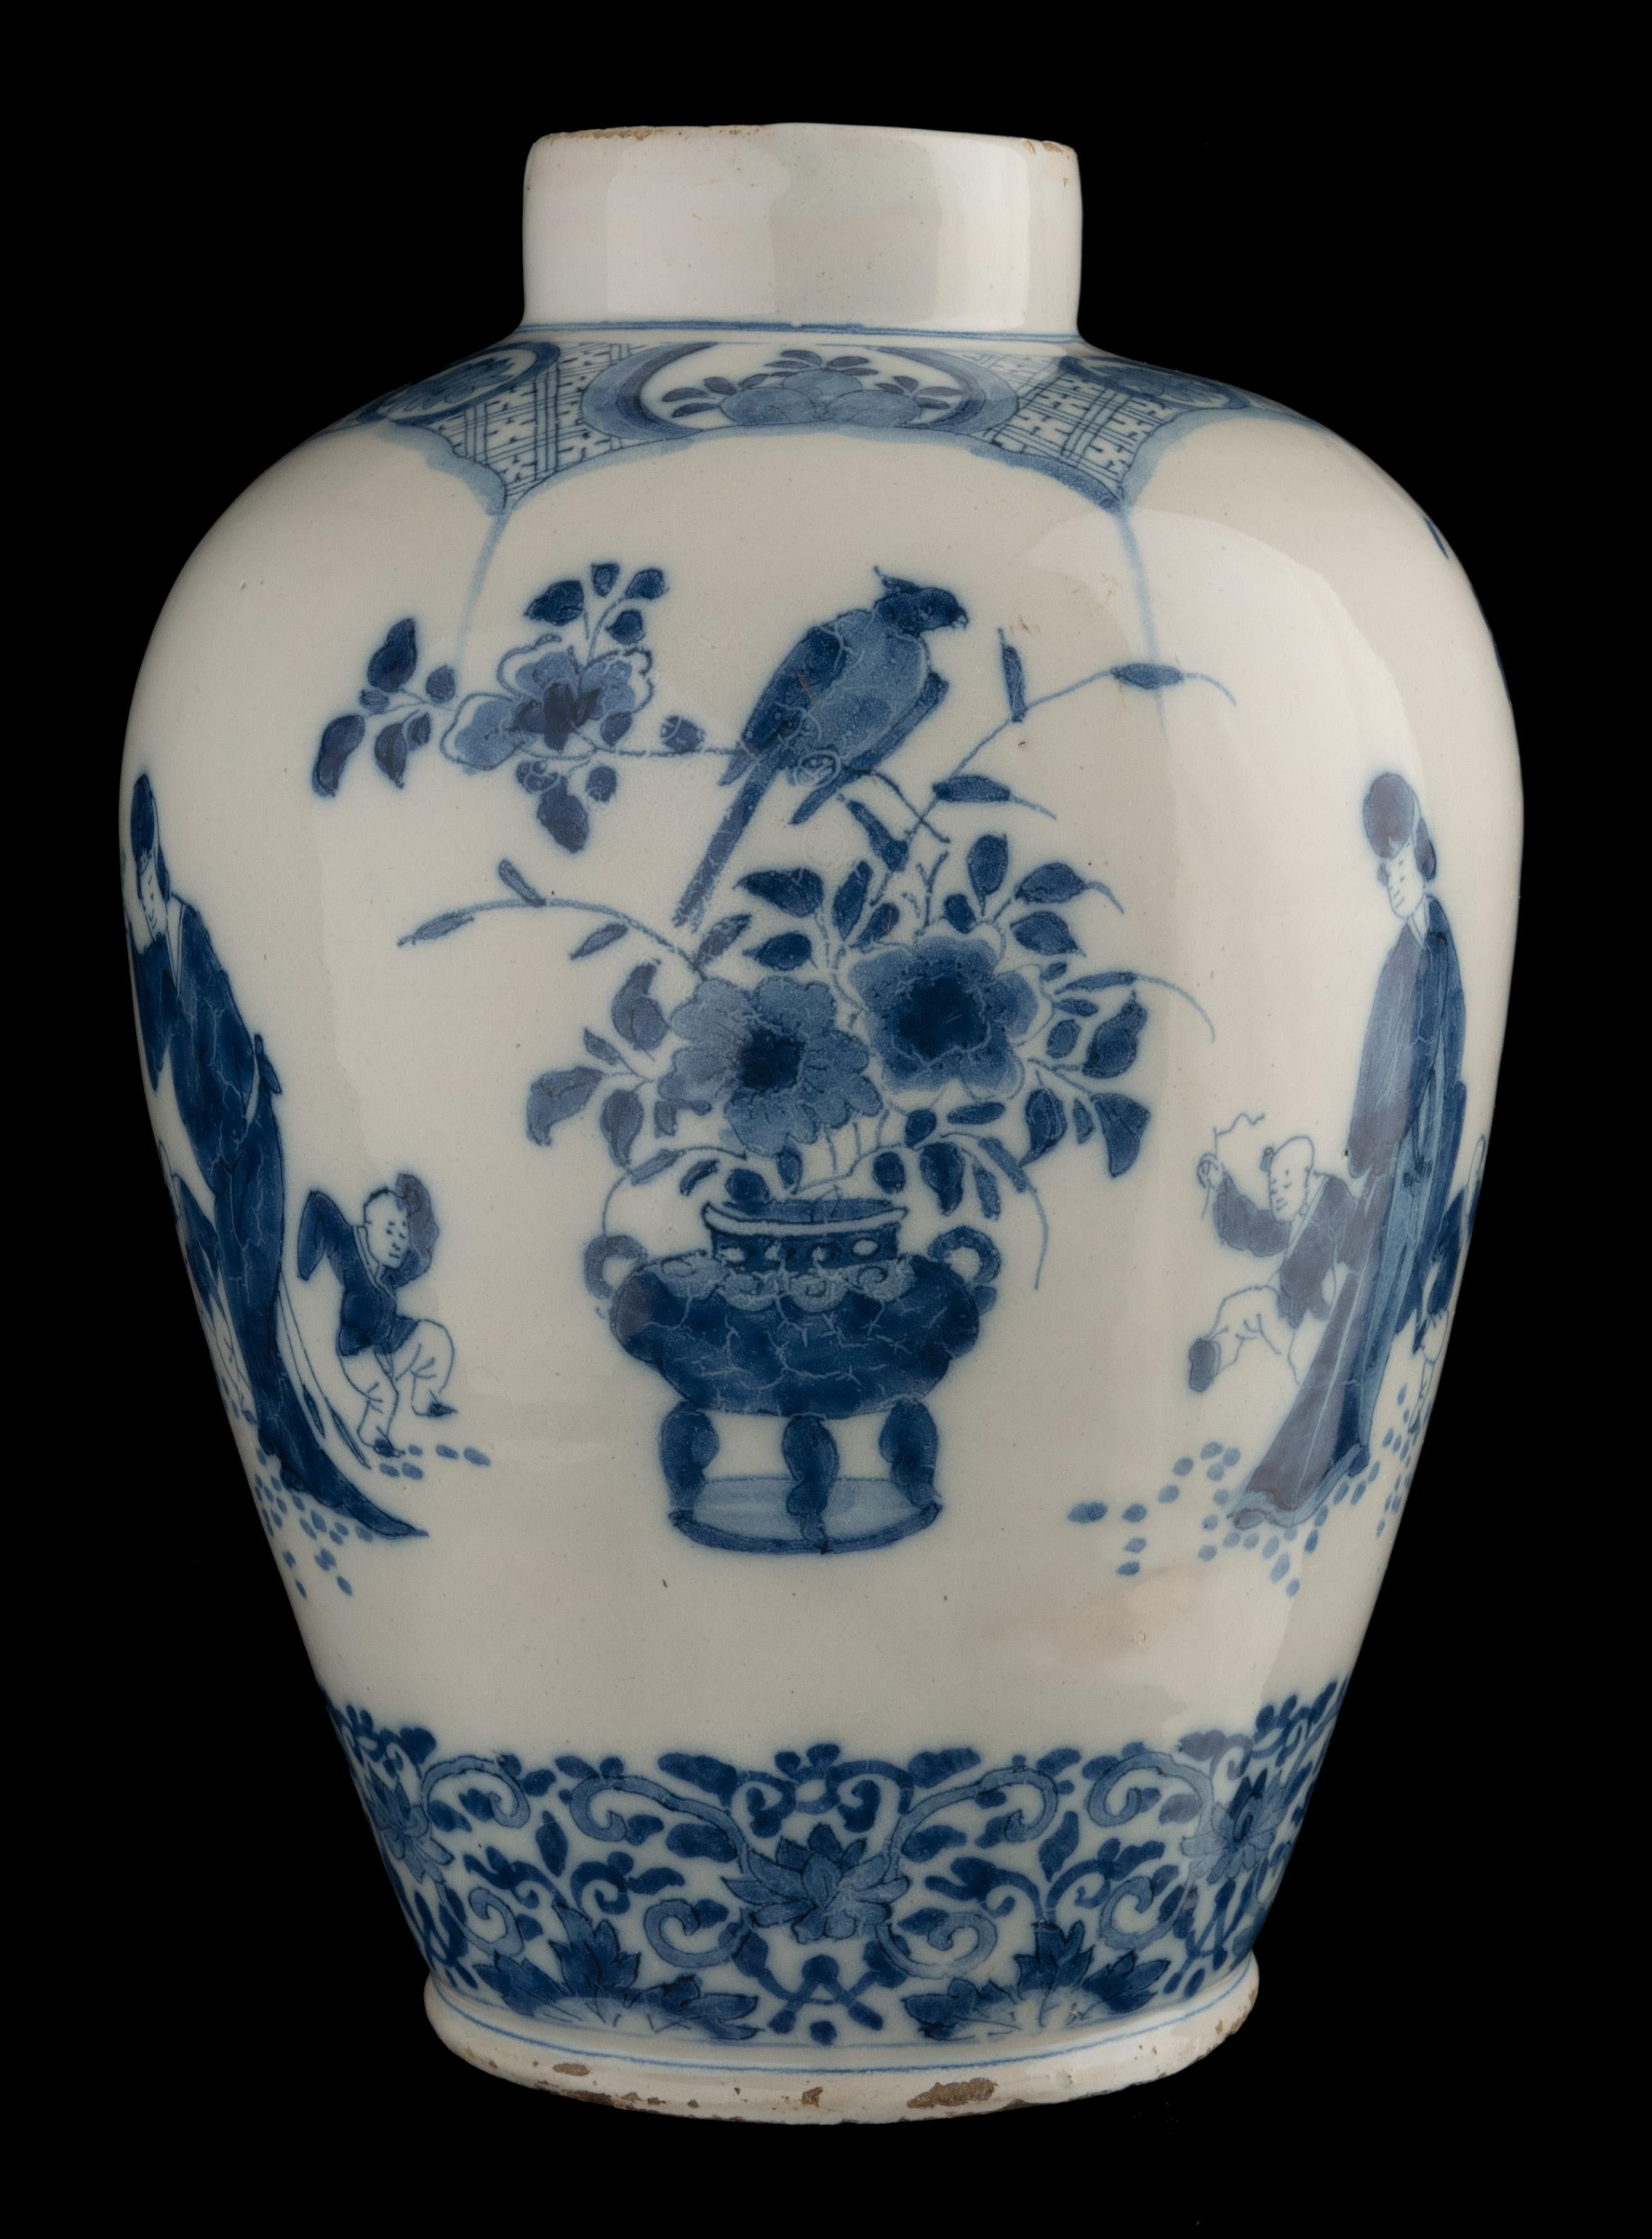 Ceramic Blue and white chinoiserie jar Delft, 1700-1720 height 28 cm / 11.02 in For Sale